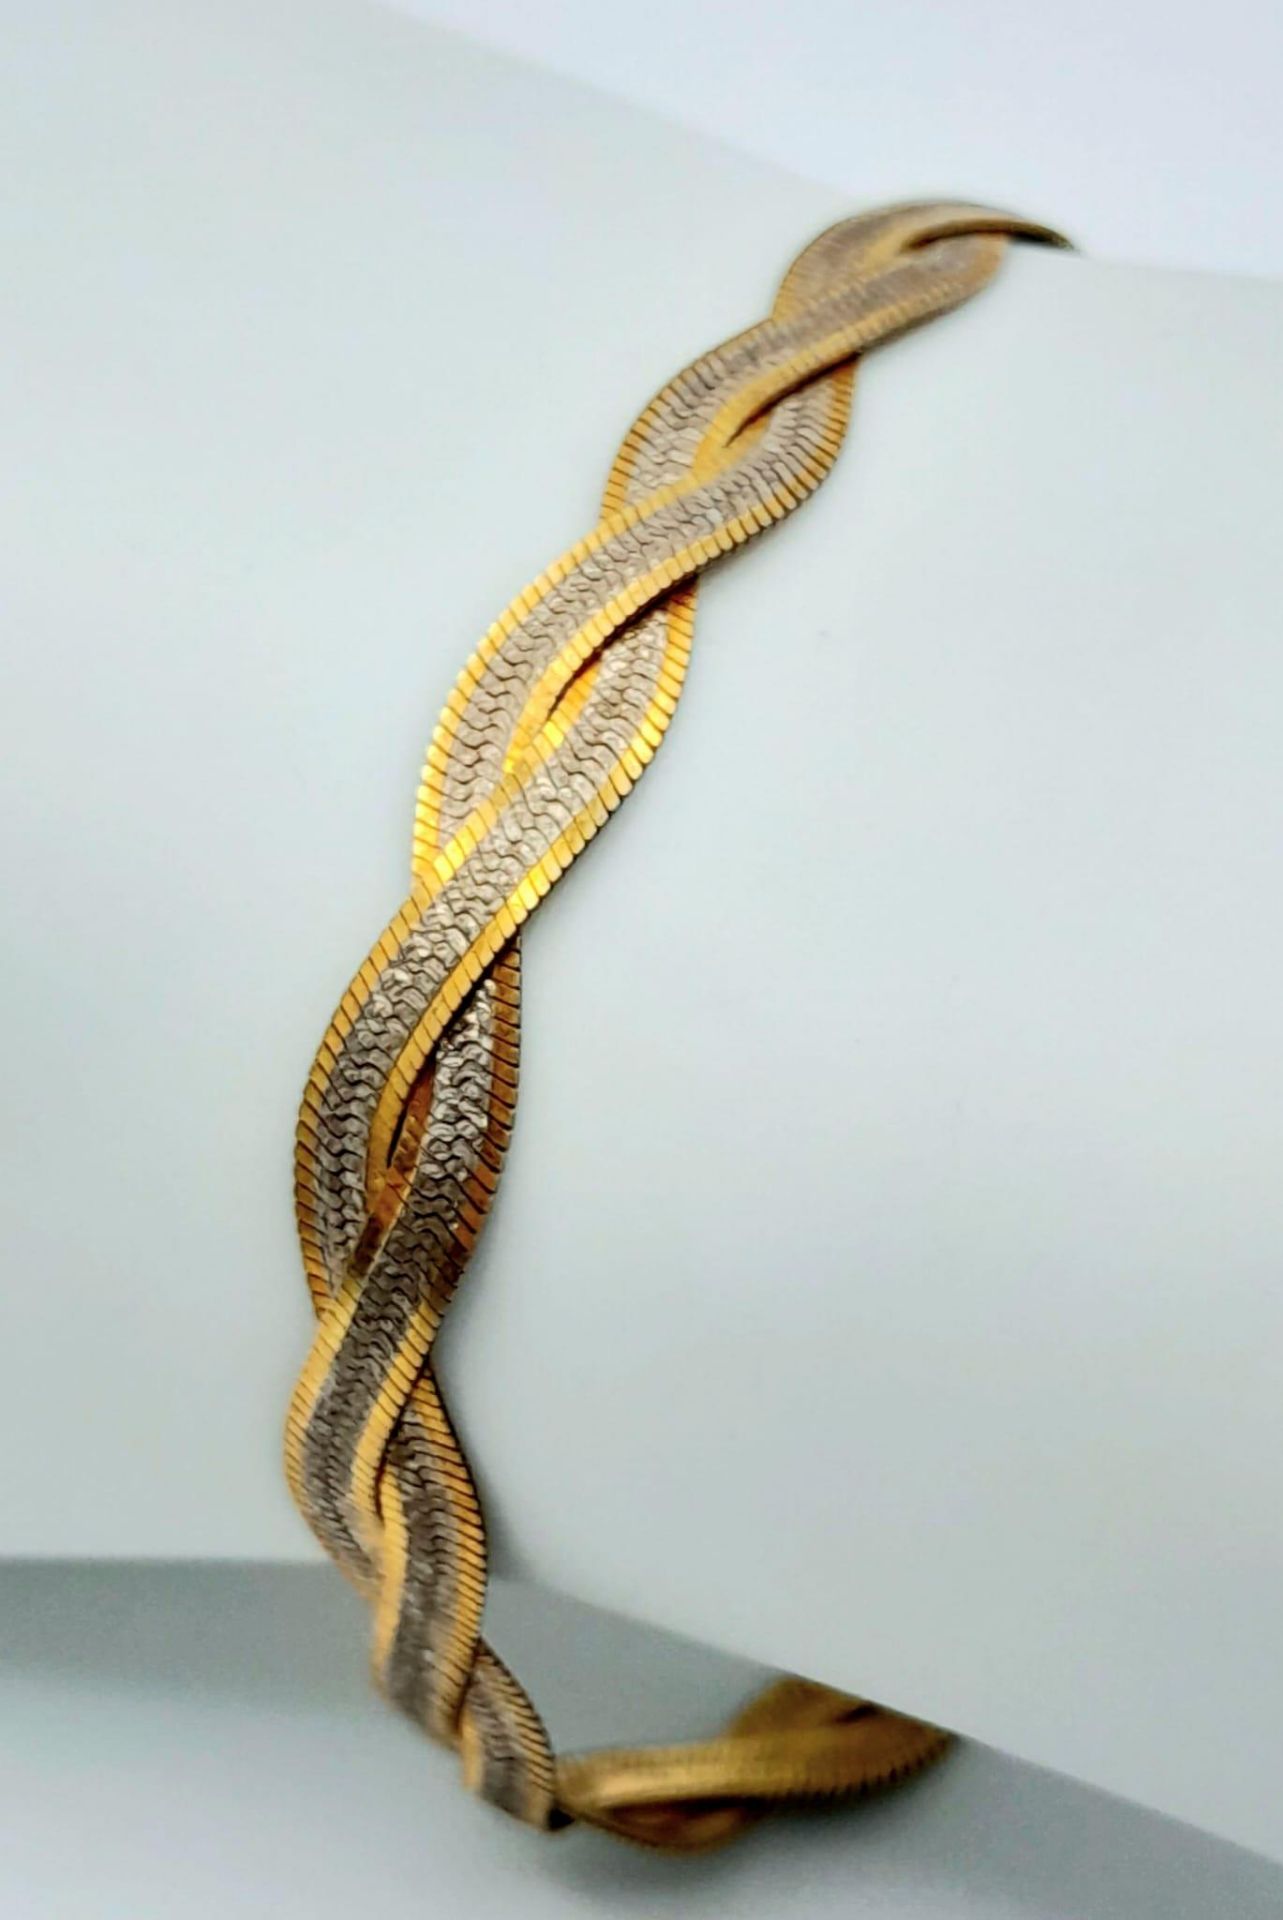 A 925 Sterling Silver Gilded and White Interwoven Flat Bracelet. 16cm.